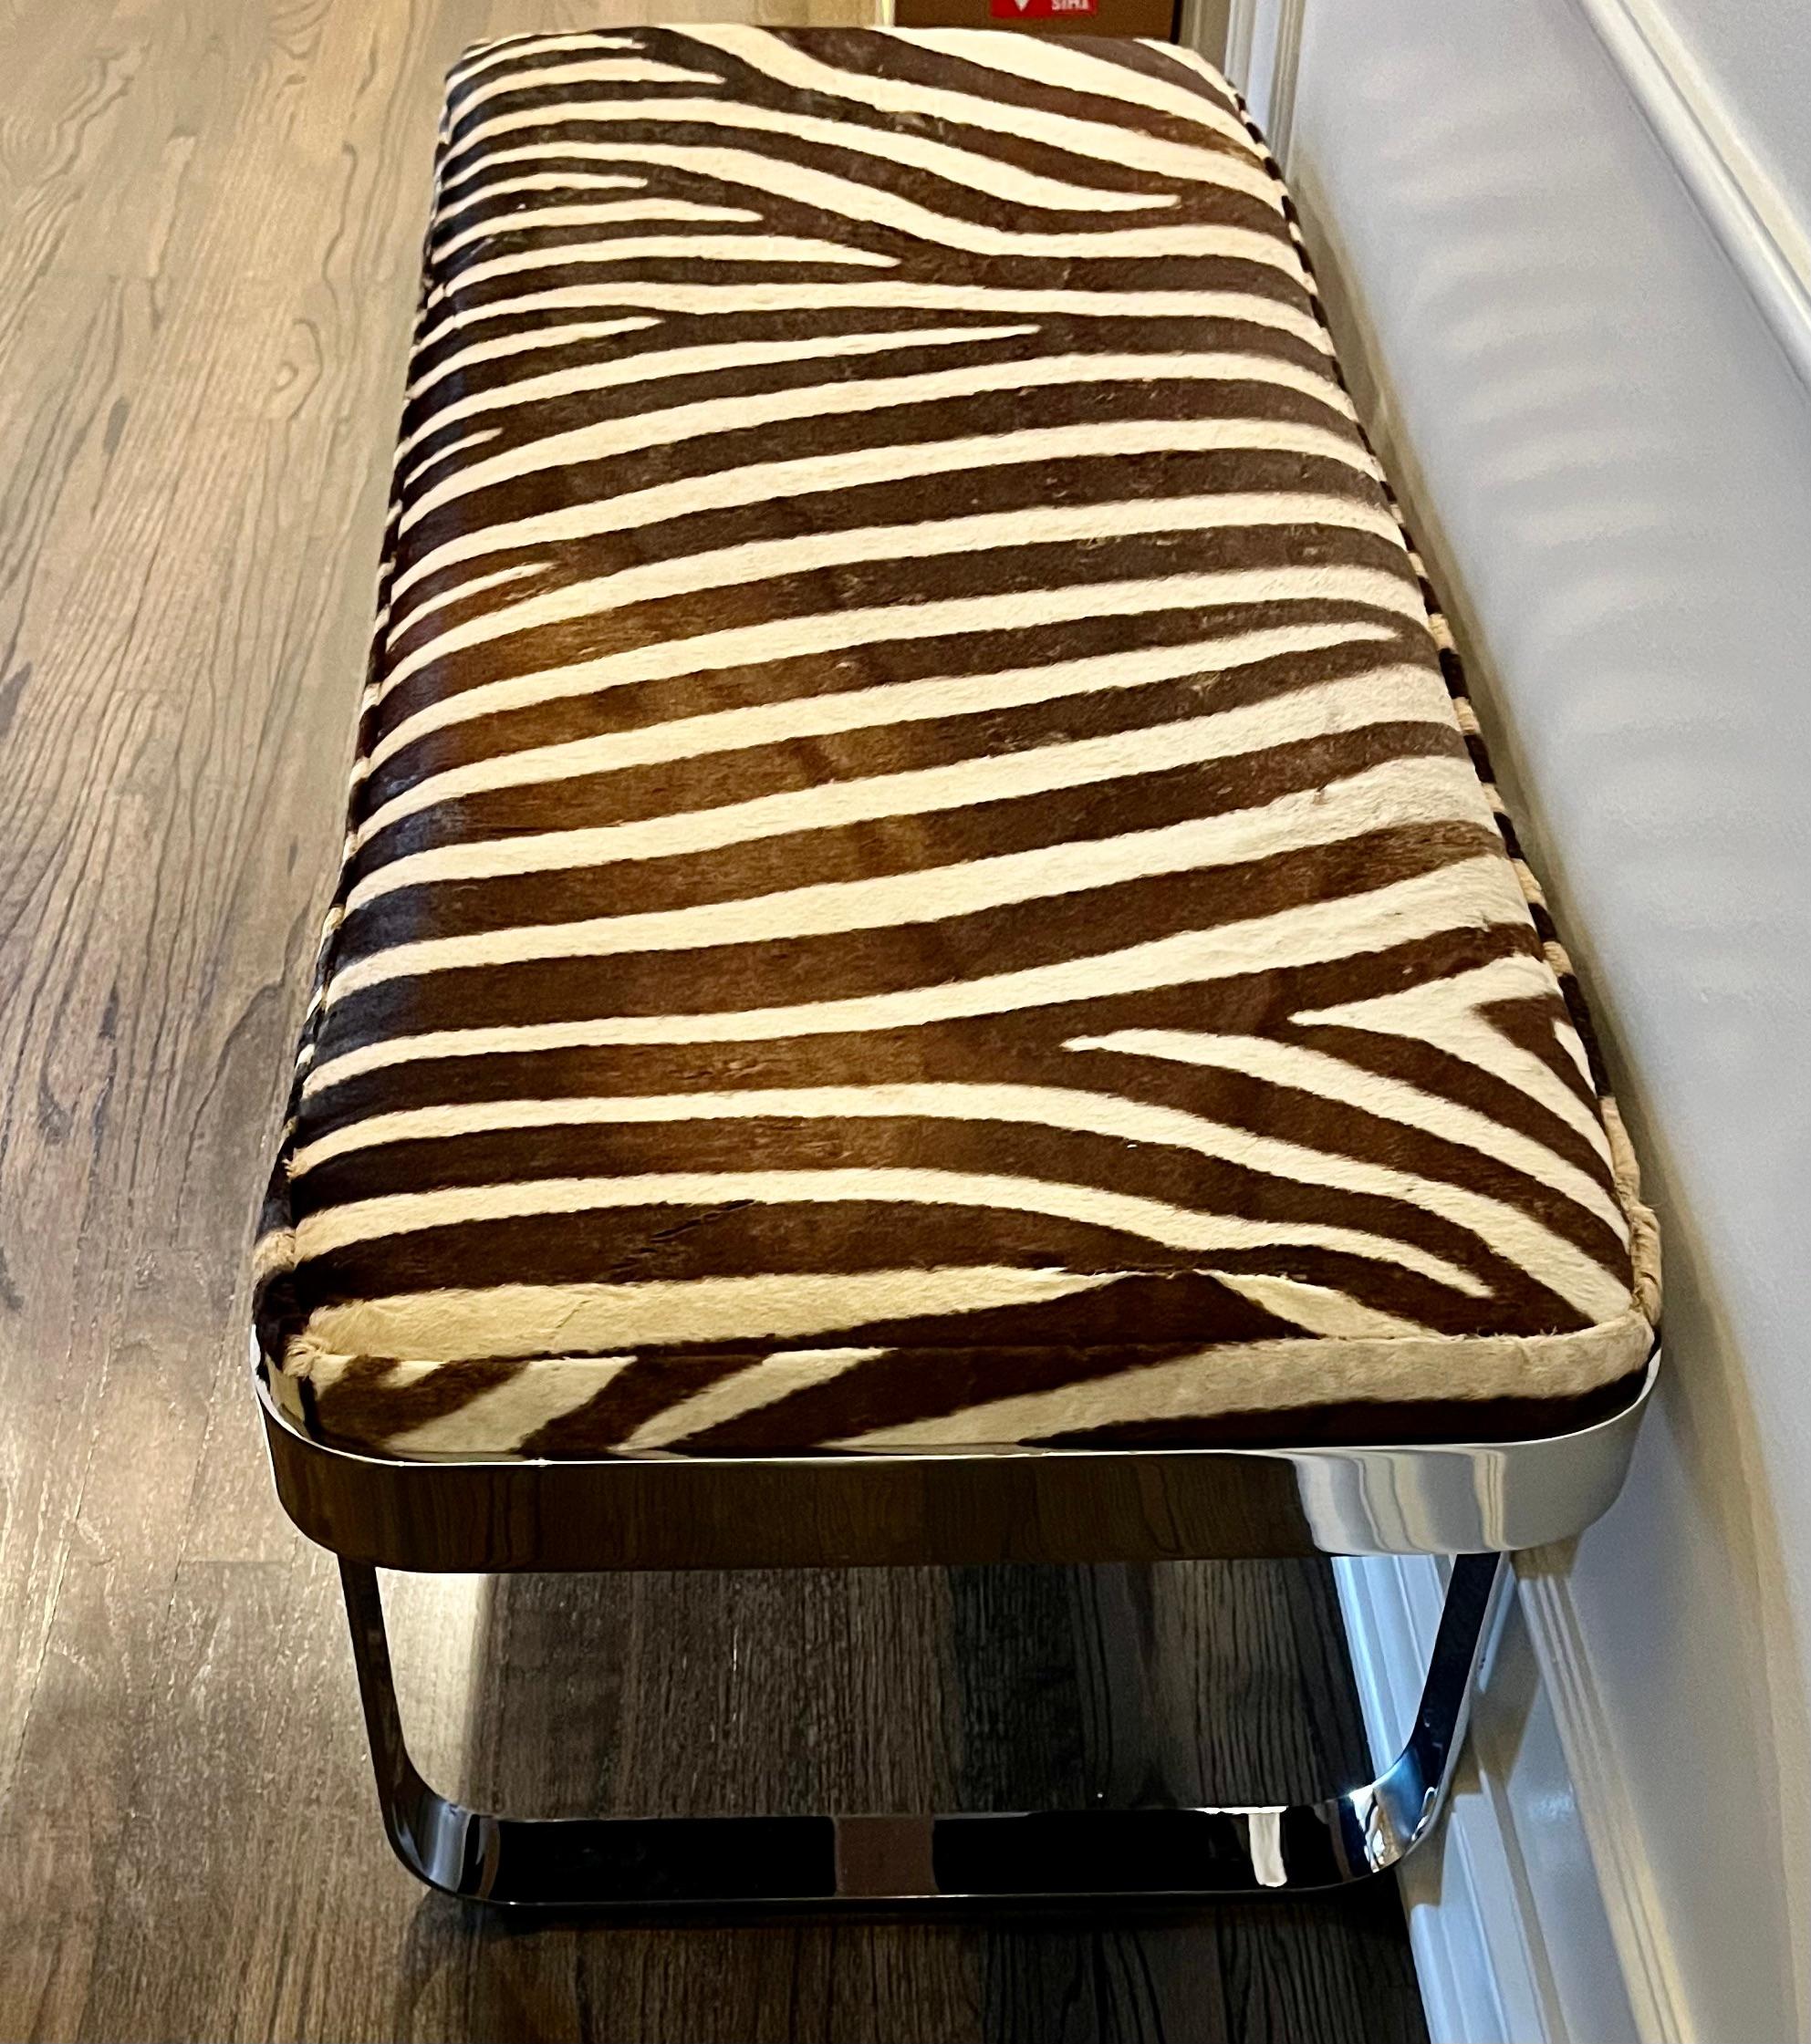 A polished chrome bench manufactured by Tri-Mark and newly upholstered in zebra hide. All in outstanding condition.